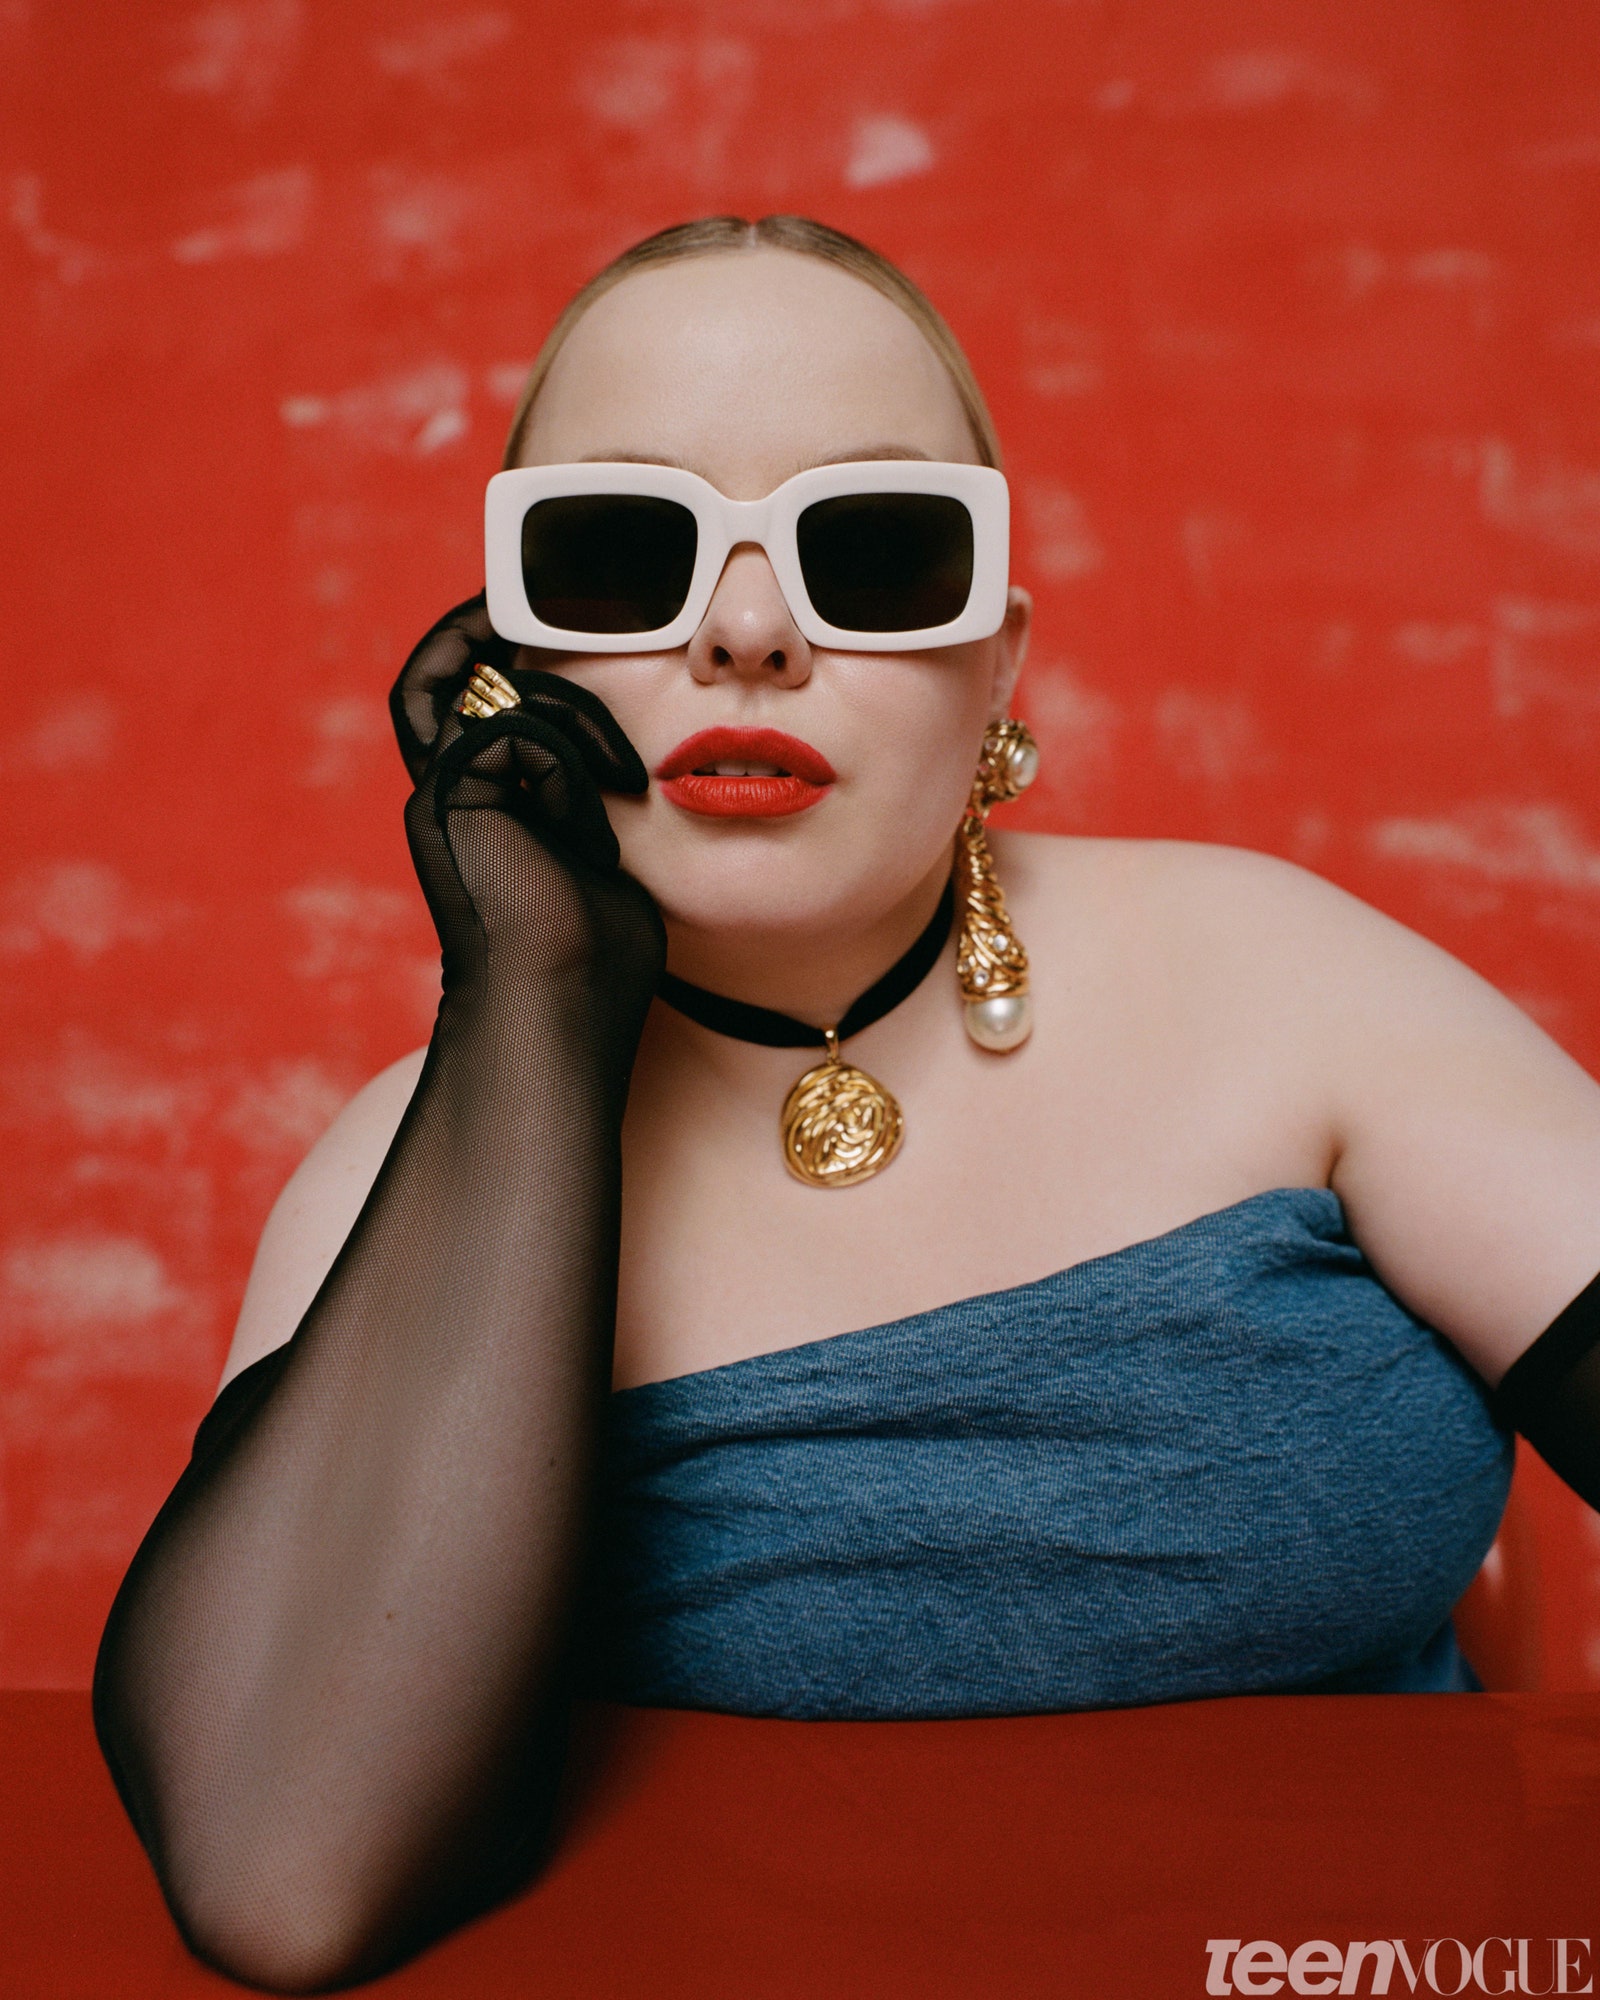 Nicola Coughlan with big sunglasses and gloves against a red backdrop